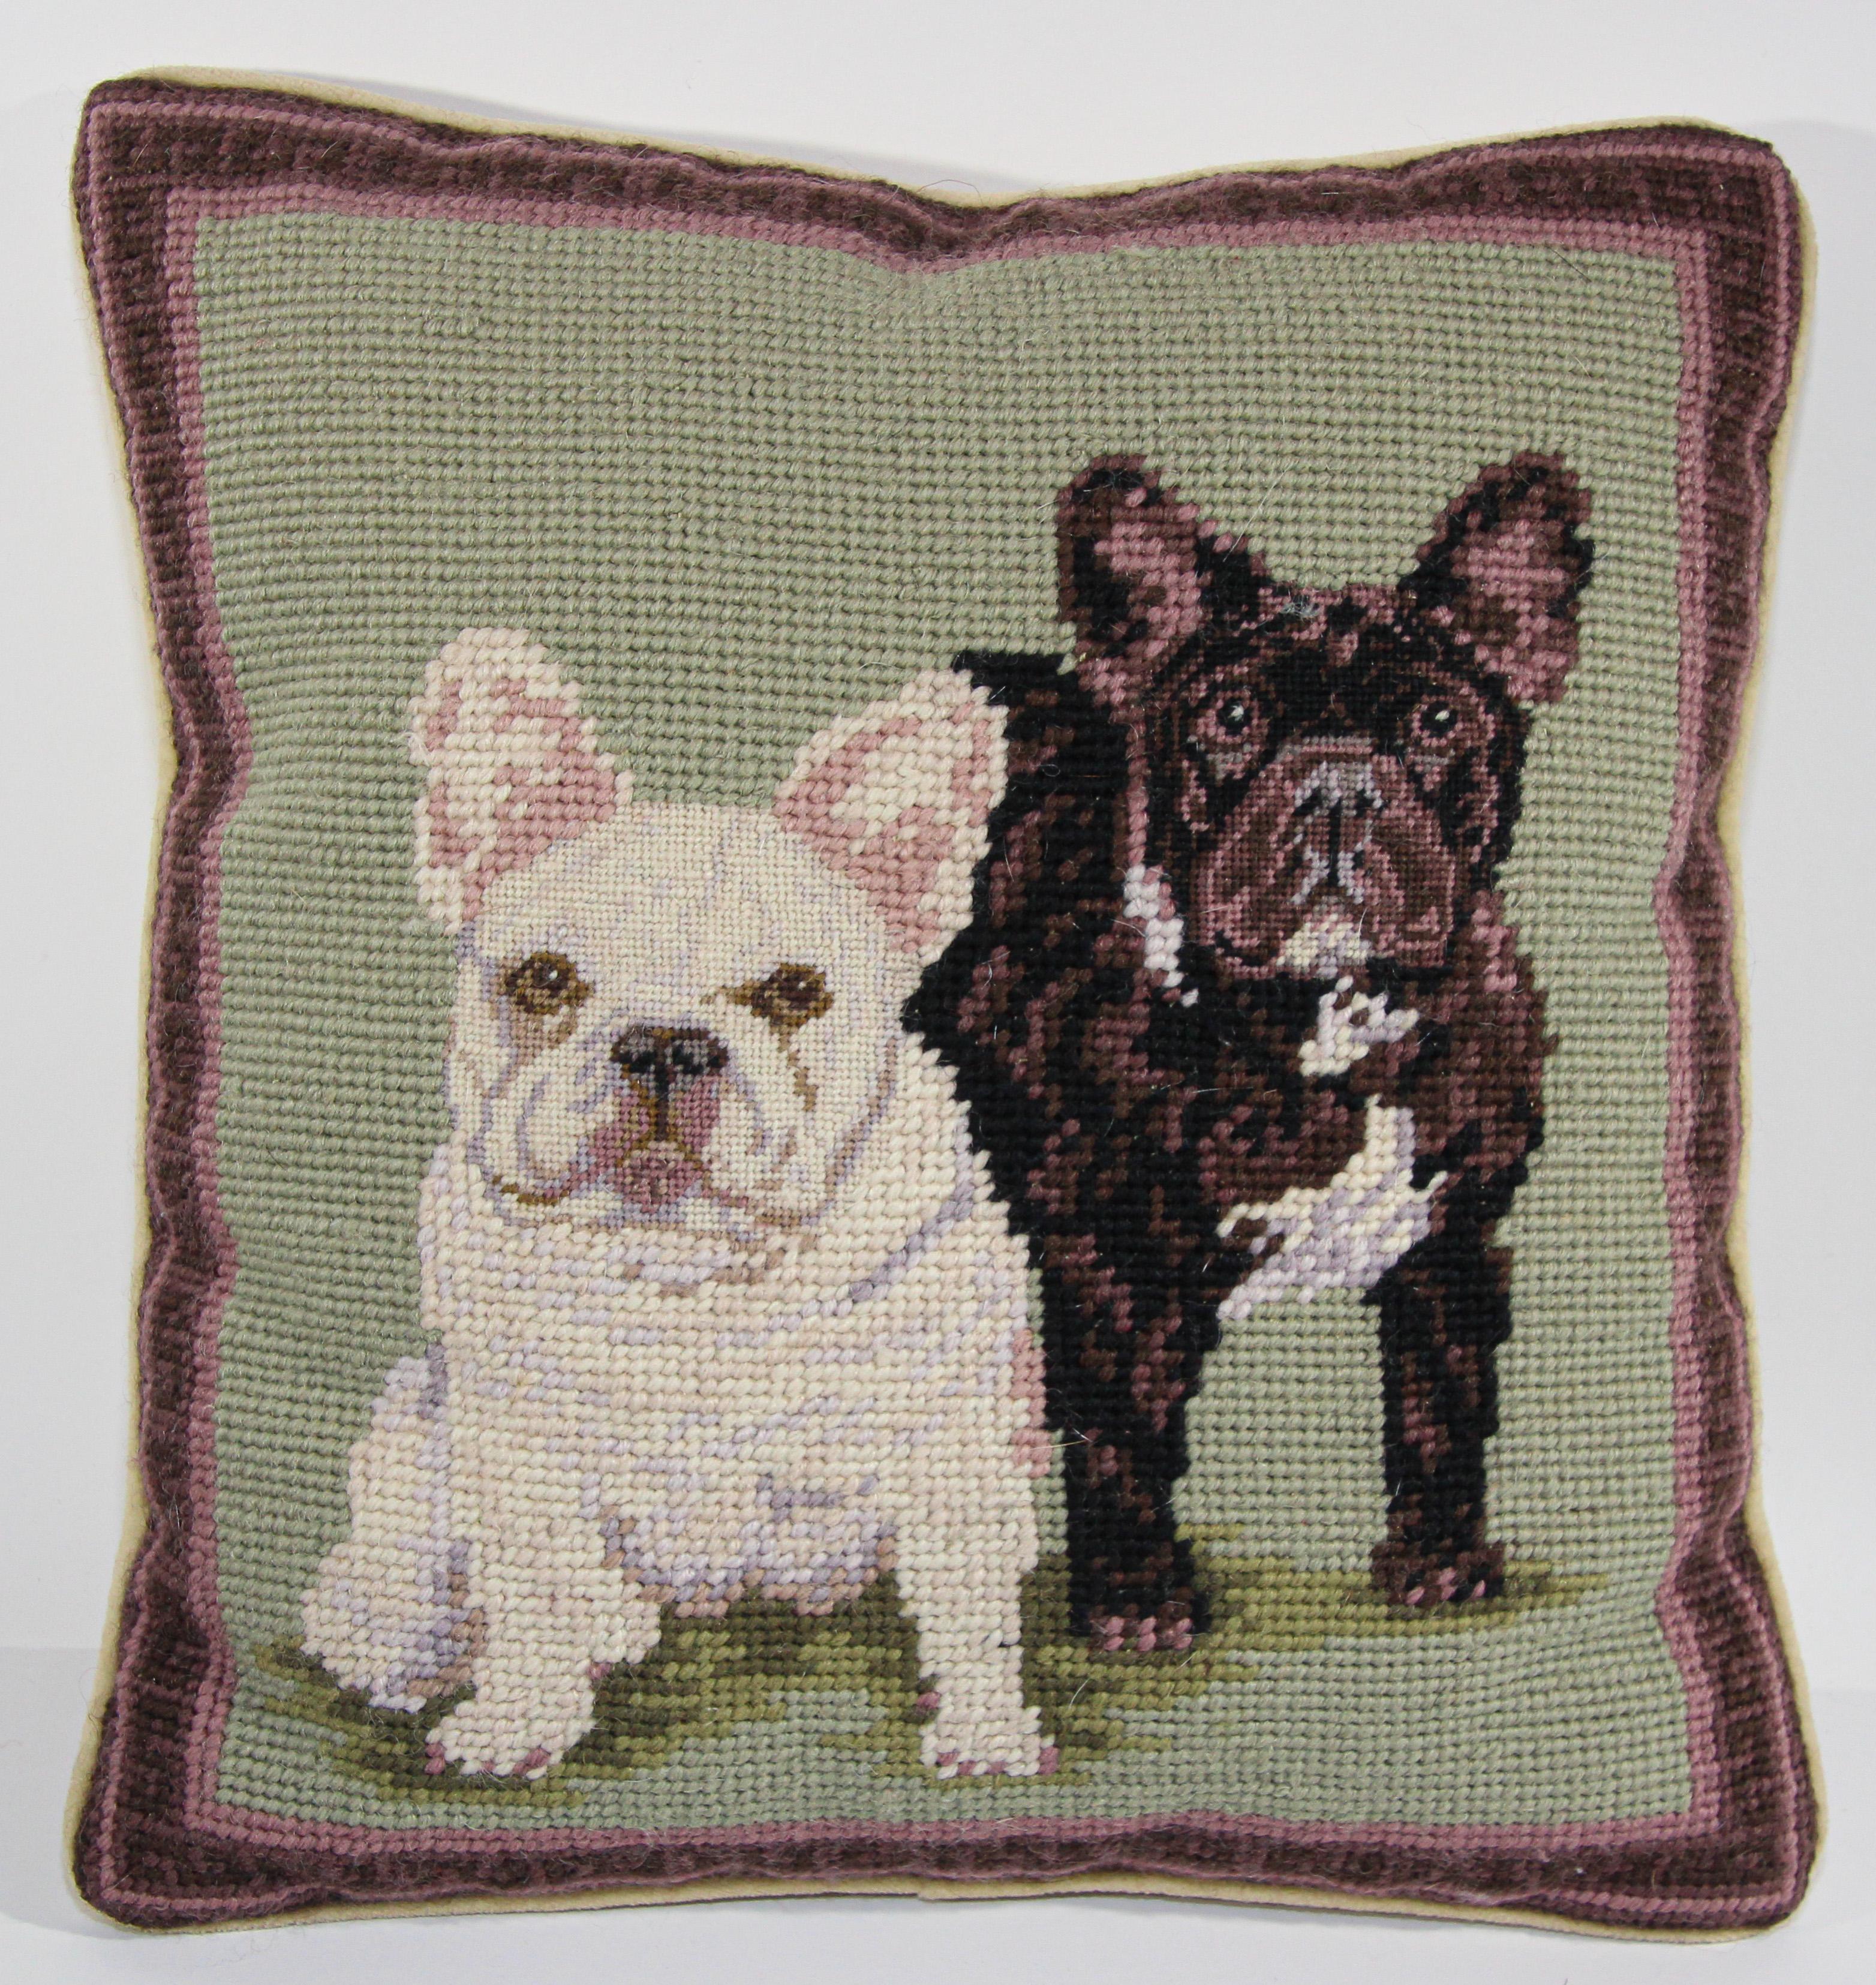 Crewel throw pillow with dogs design featuring portrait of two Boston Terrier bulldogs against a green background. Bordered in browns. 
Hand-crafted in 100% wool needlepoint. 
Great gift for the dog lovers home! 
Dog décor pillow has tan piping